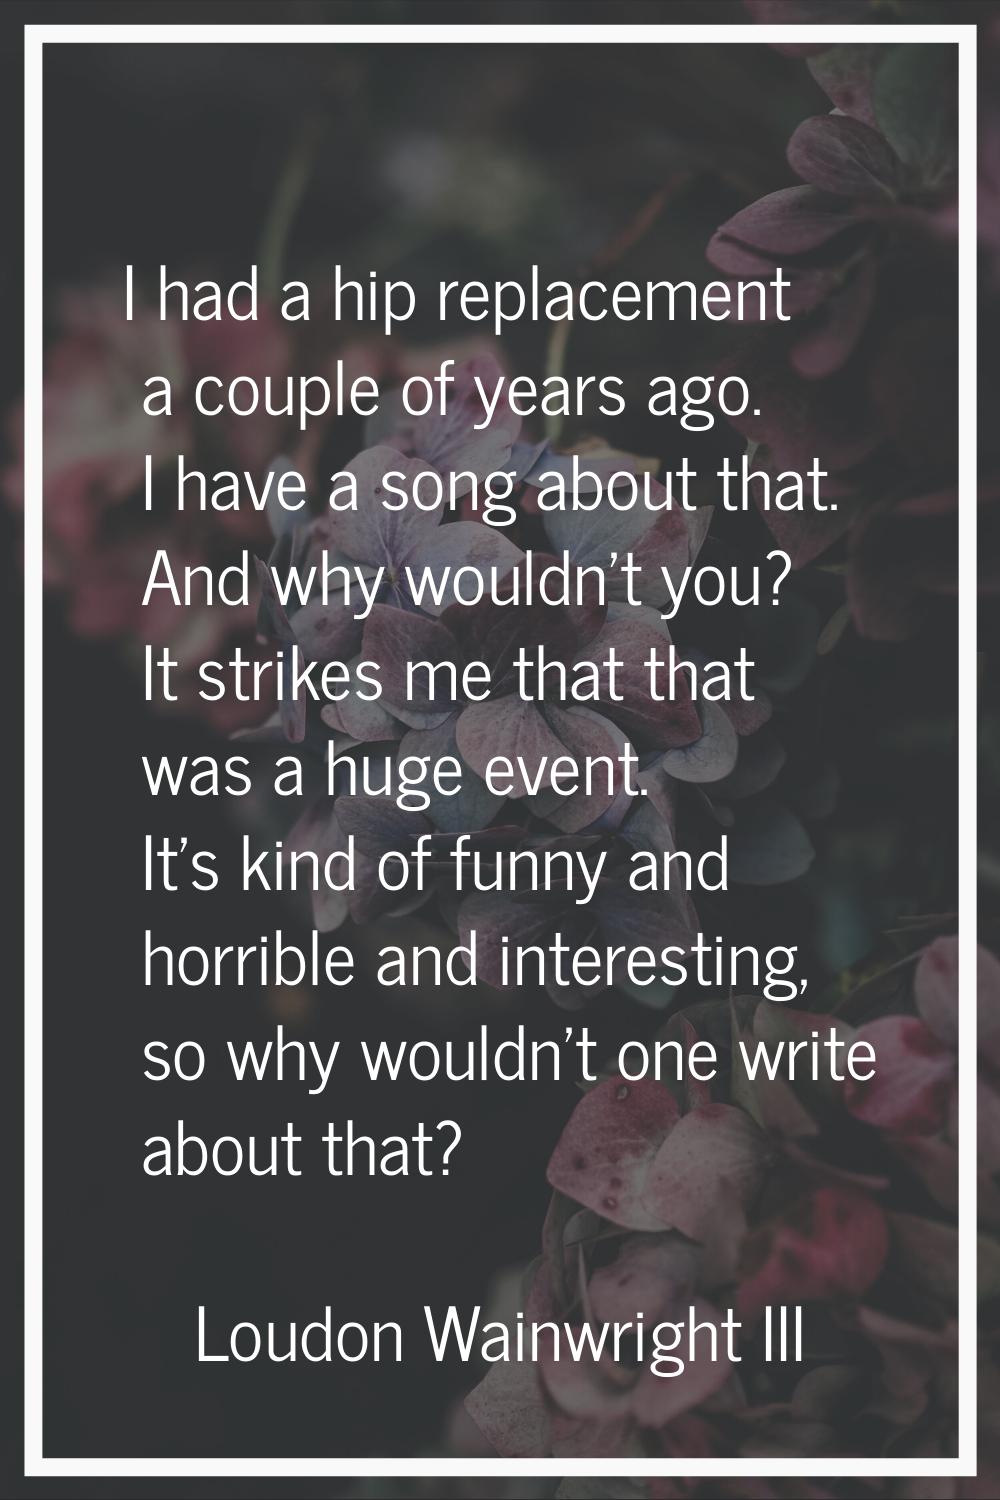 I had a hip replacement a couple of years ago. I have a song about that. And why wouldn't you? It s